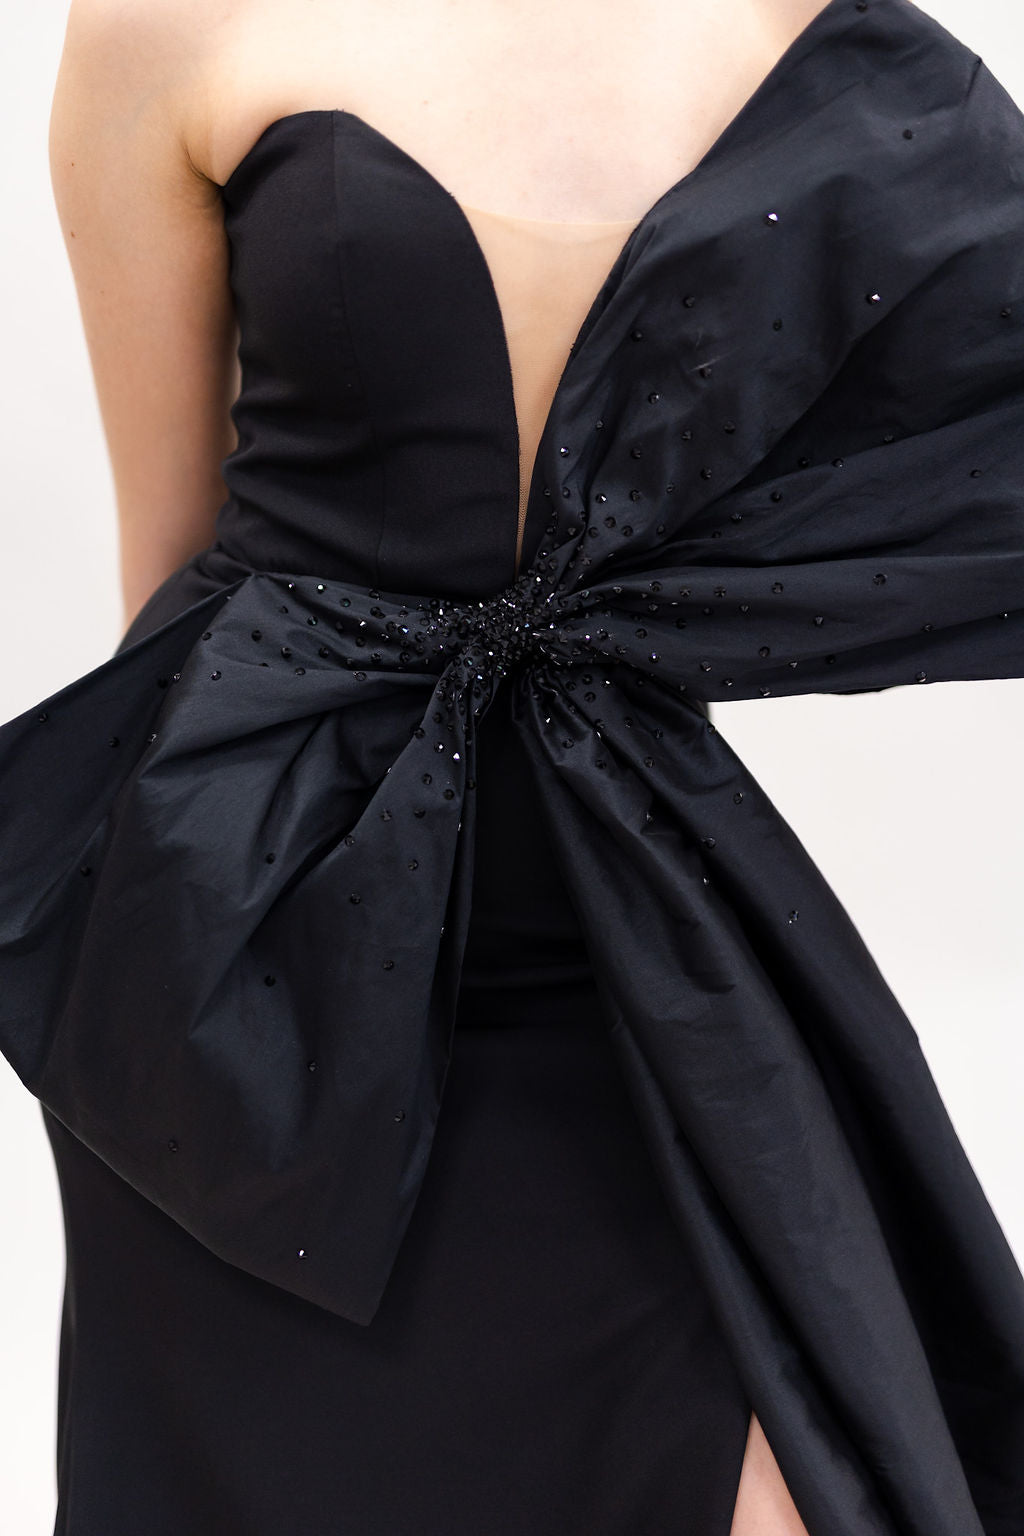 BLACK CREPE DEEP V NECK GOWN WITH BOW AND SWAROVSKI DETAILS